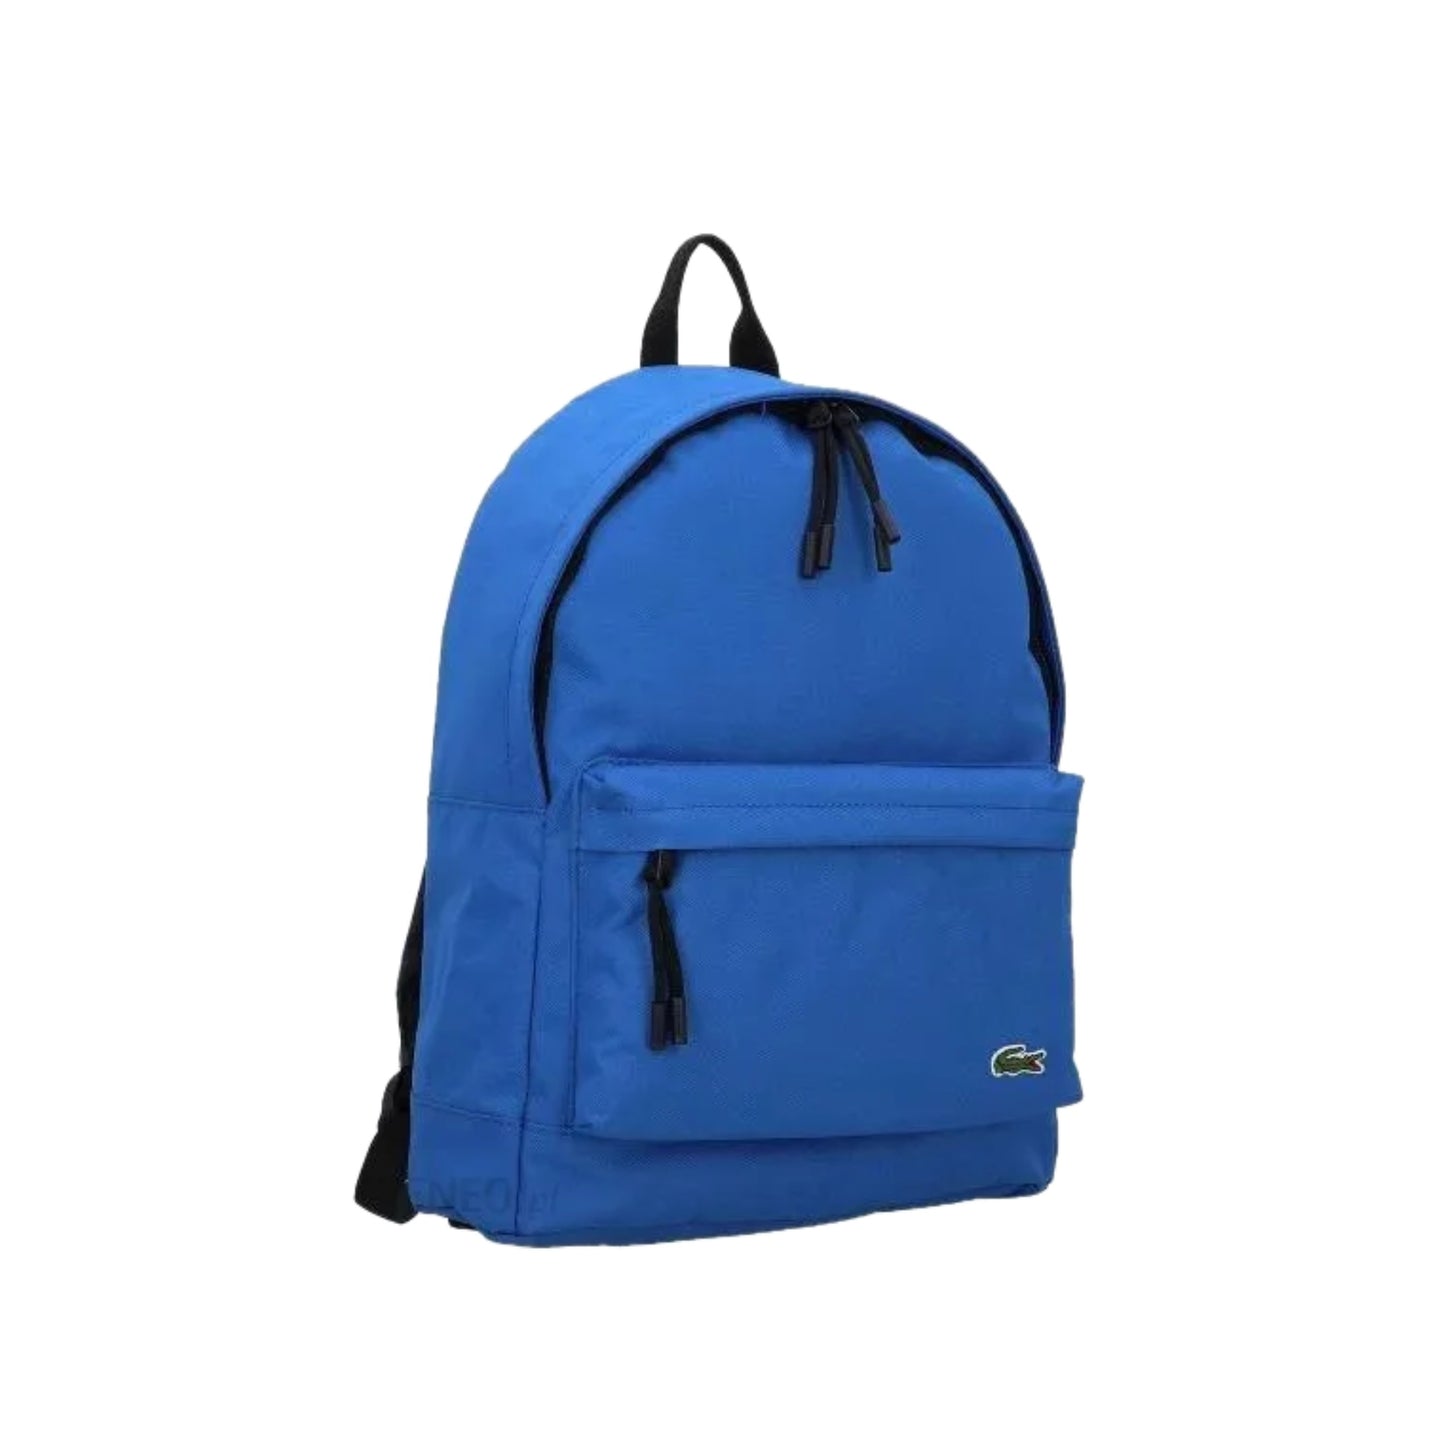 Lacoste Neocroc Computer Compartment Backpack Marina